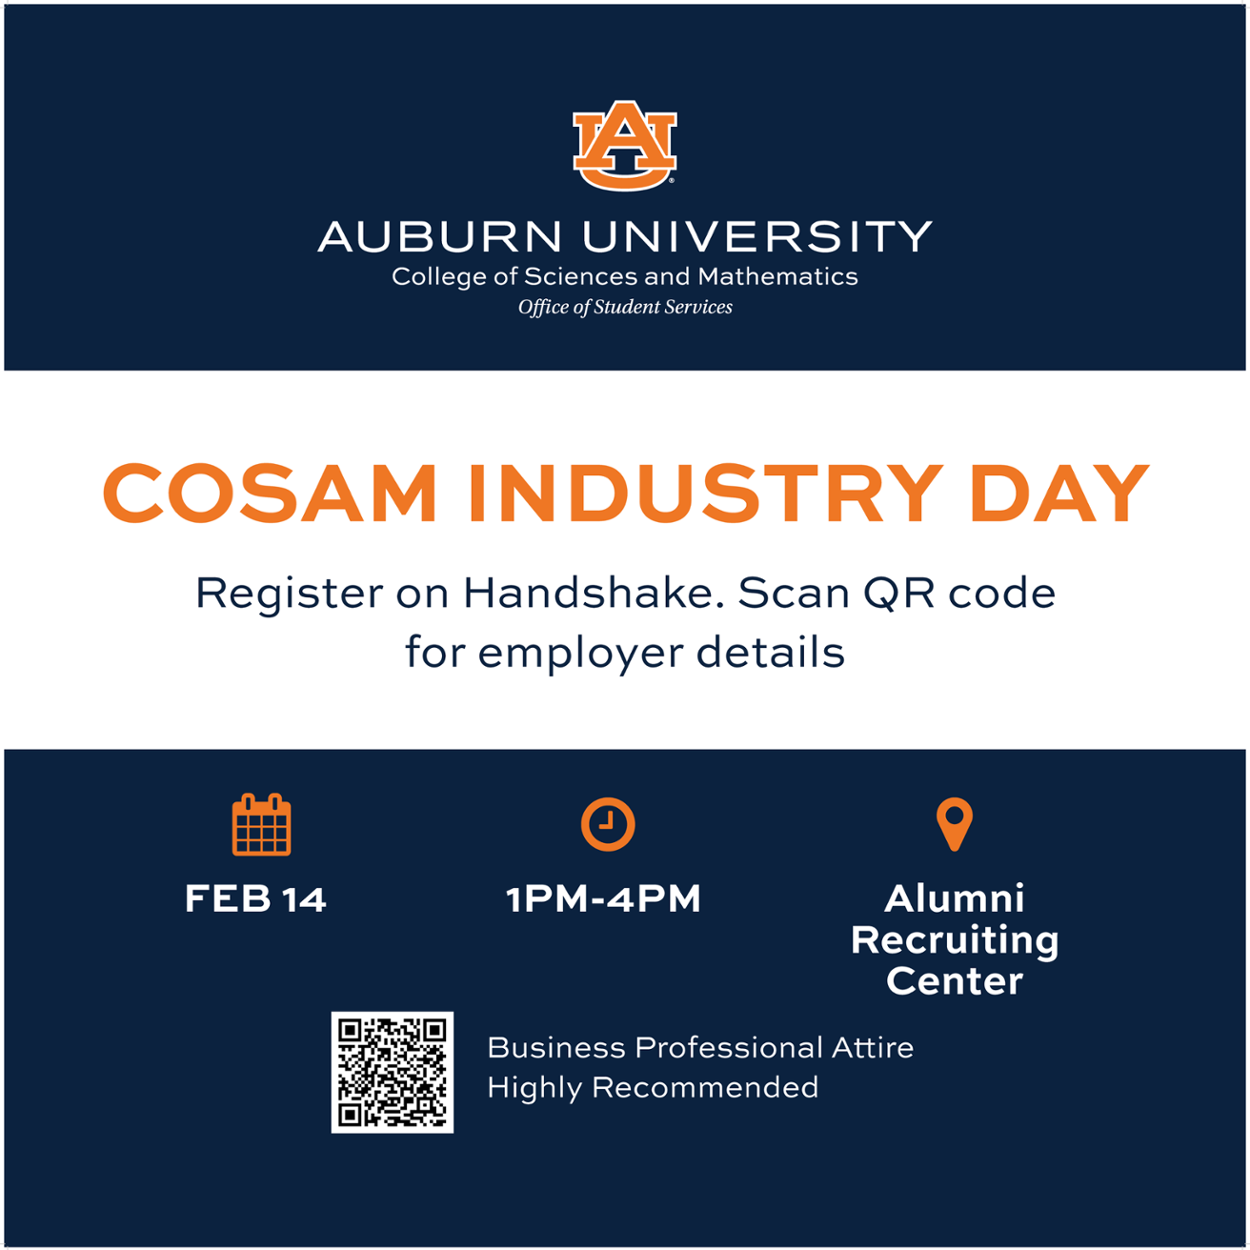 COSAM Industry Day